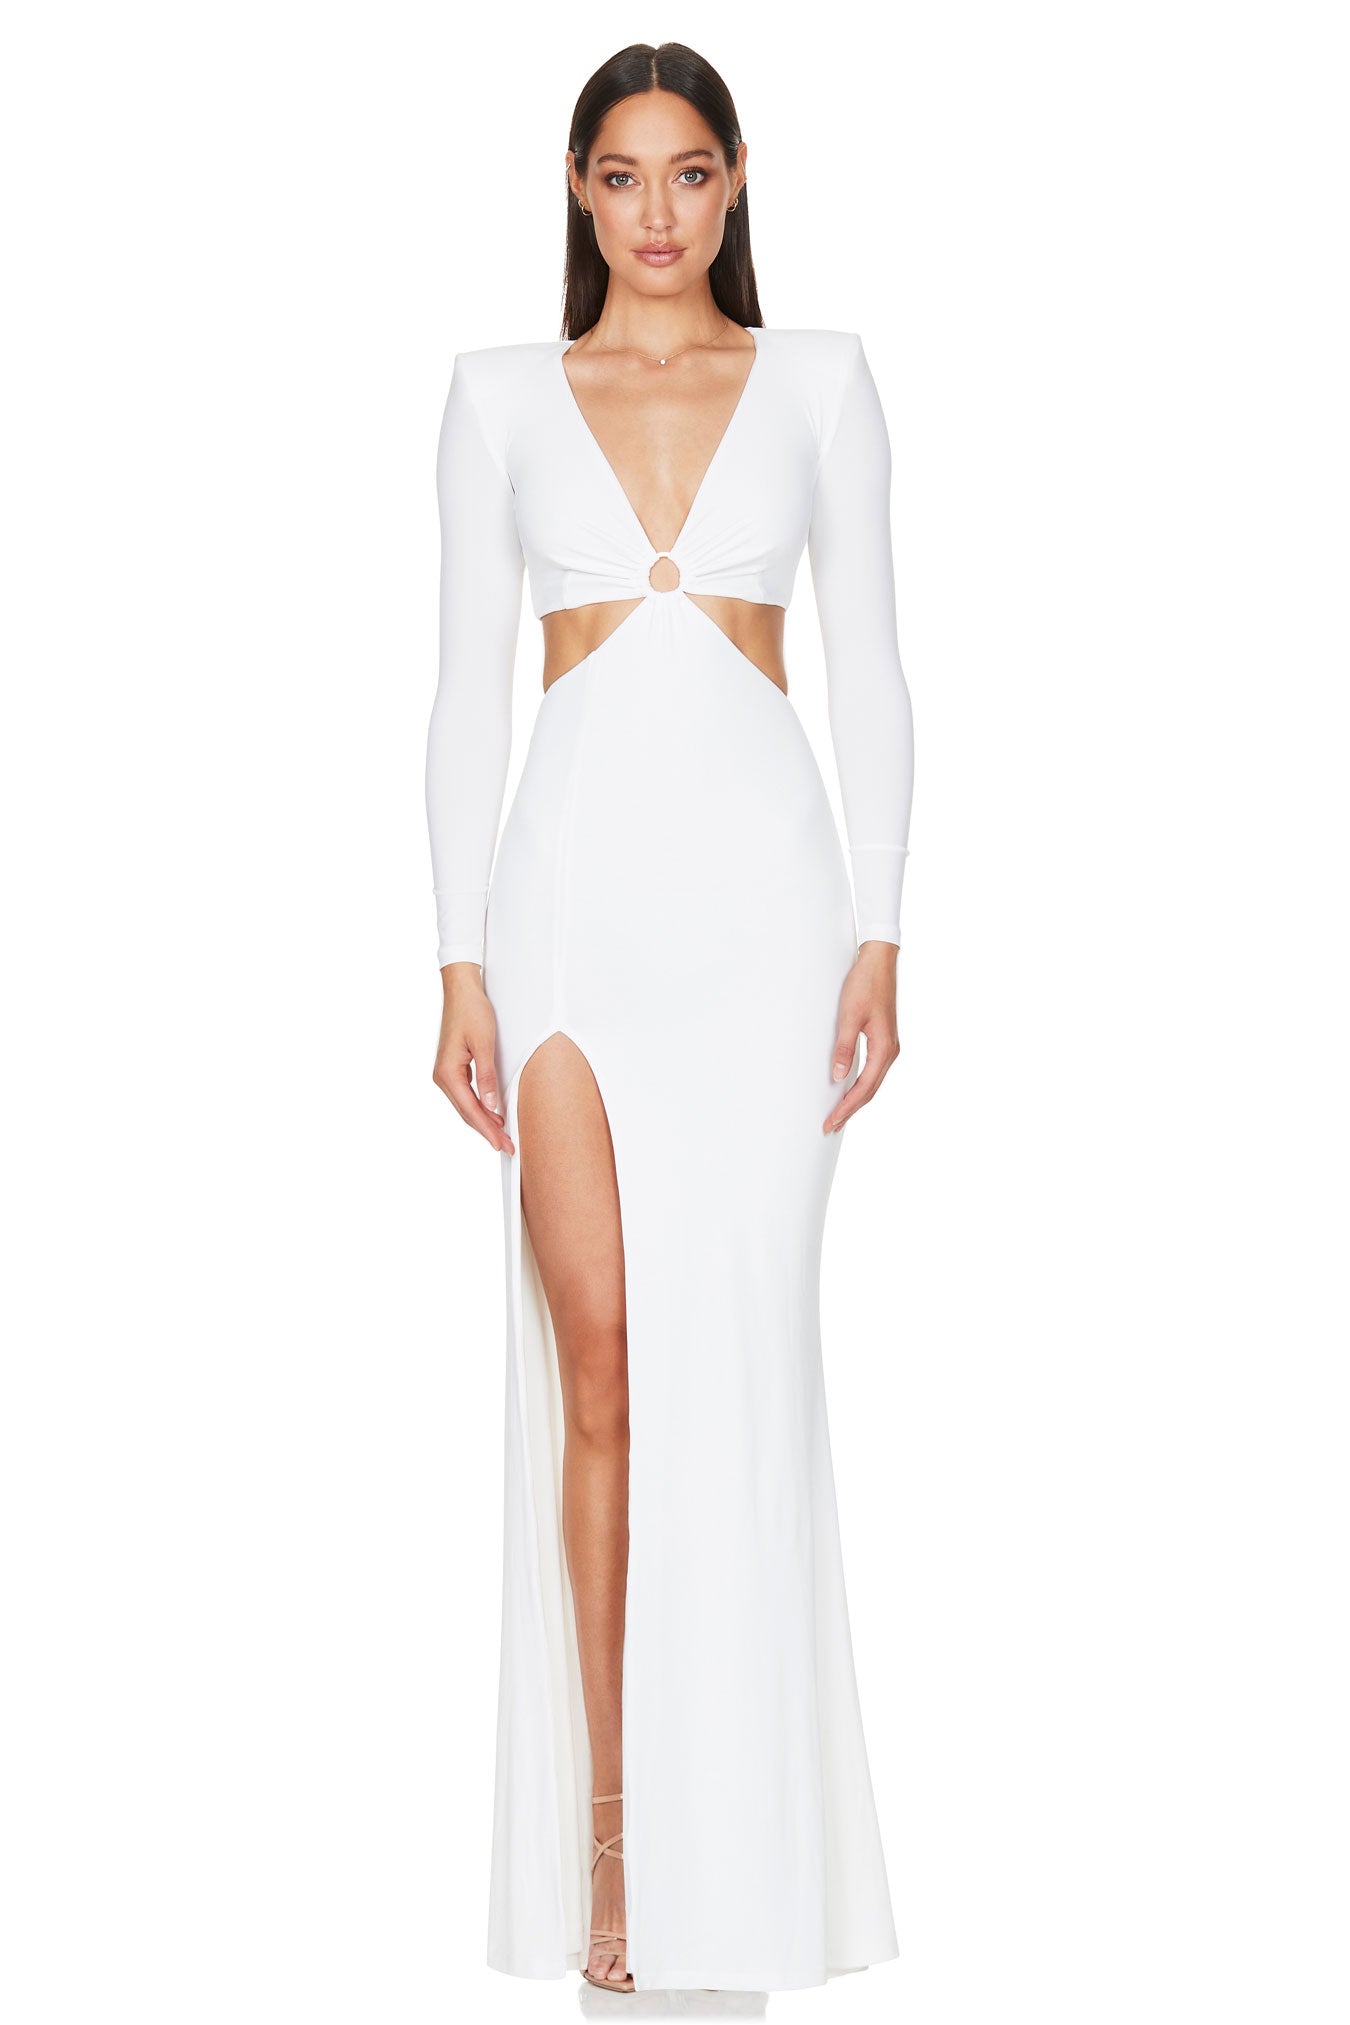 Riley Ring Cut Out Gown White